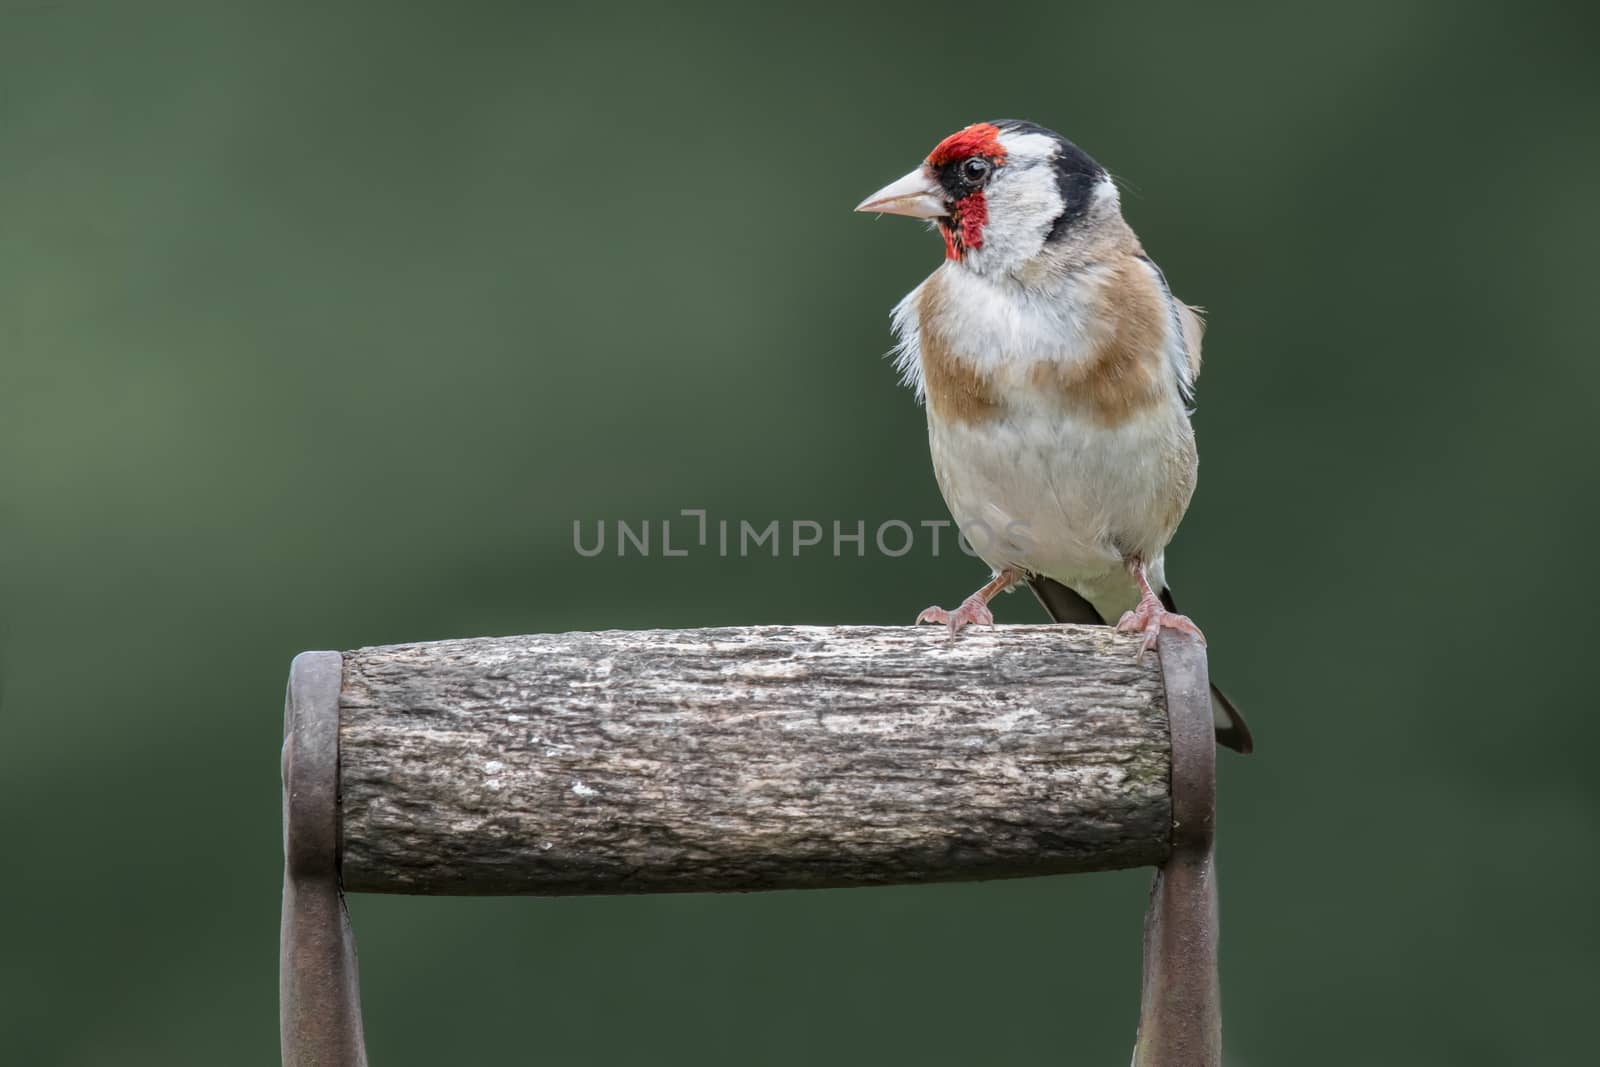 Goldfinch perched on a garden spade or fork handle looking to the left with space for text